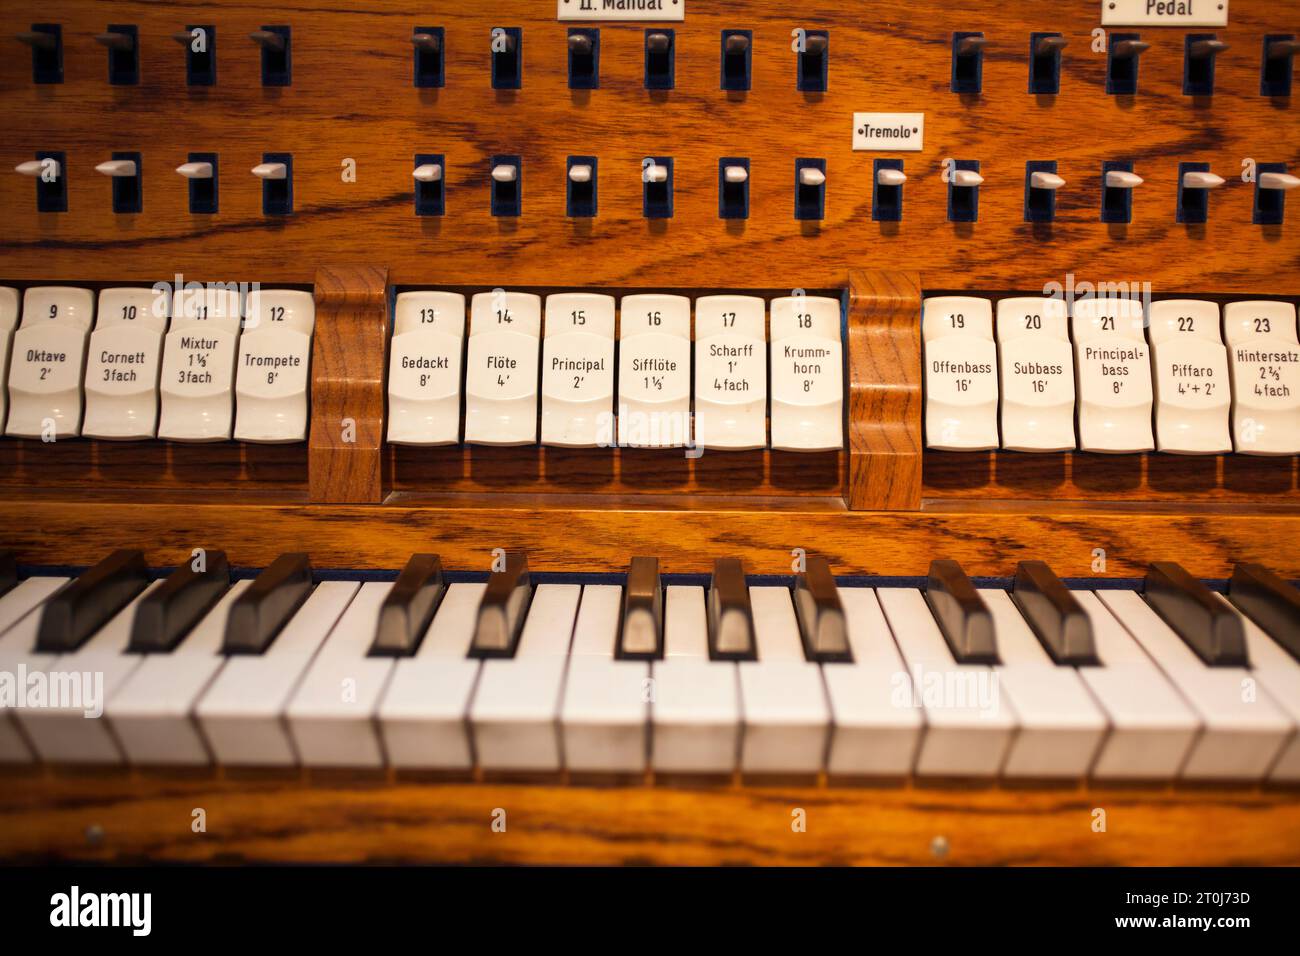 Console keydesk of an electric-action pipe organ by Franz Breil, Organ Museum Borgentreich, Höxter district, North Rhine-Westphalia, Germany, Europe Stock Photo